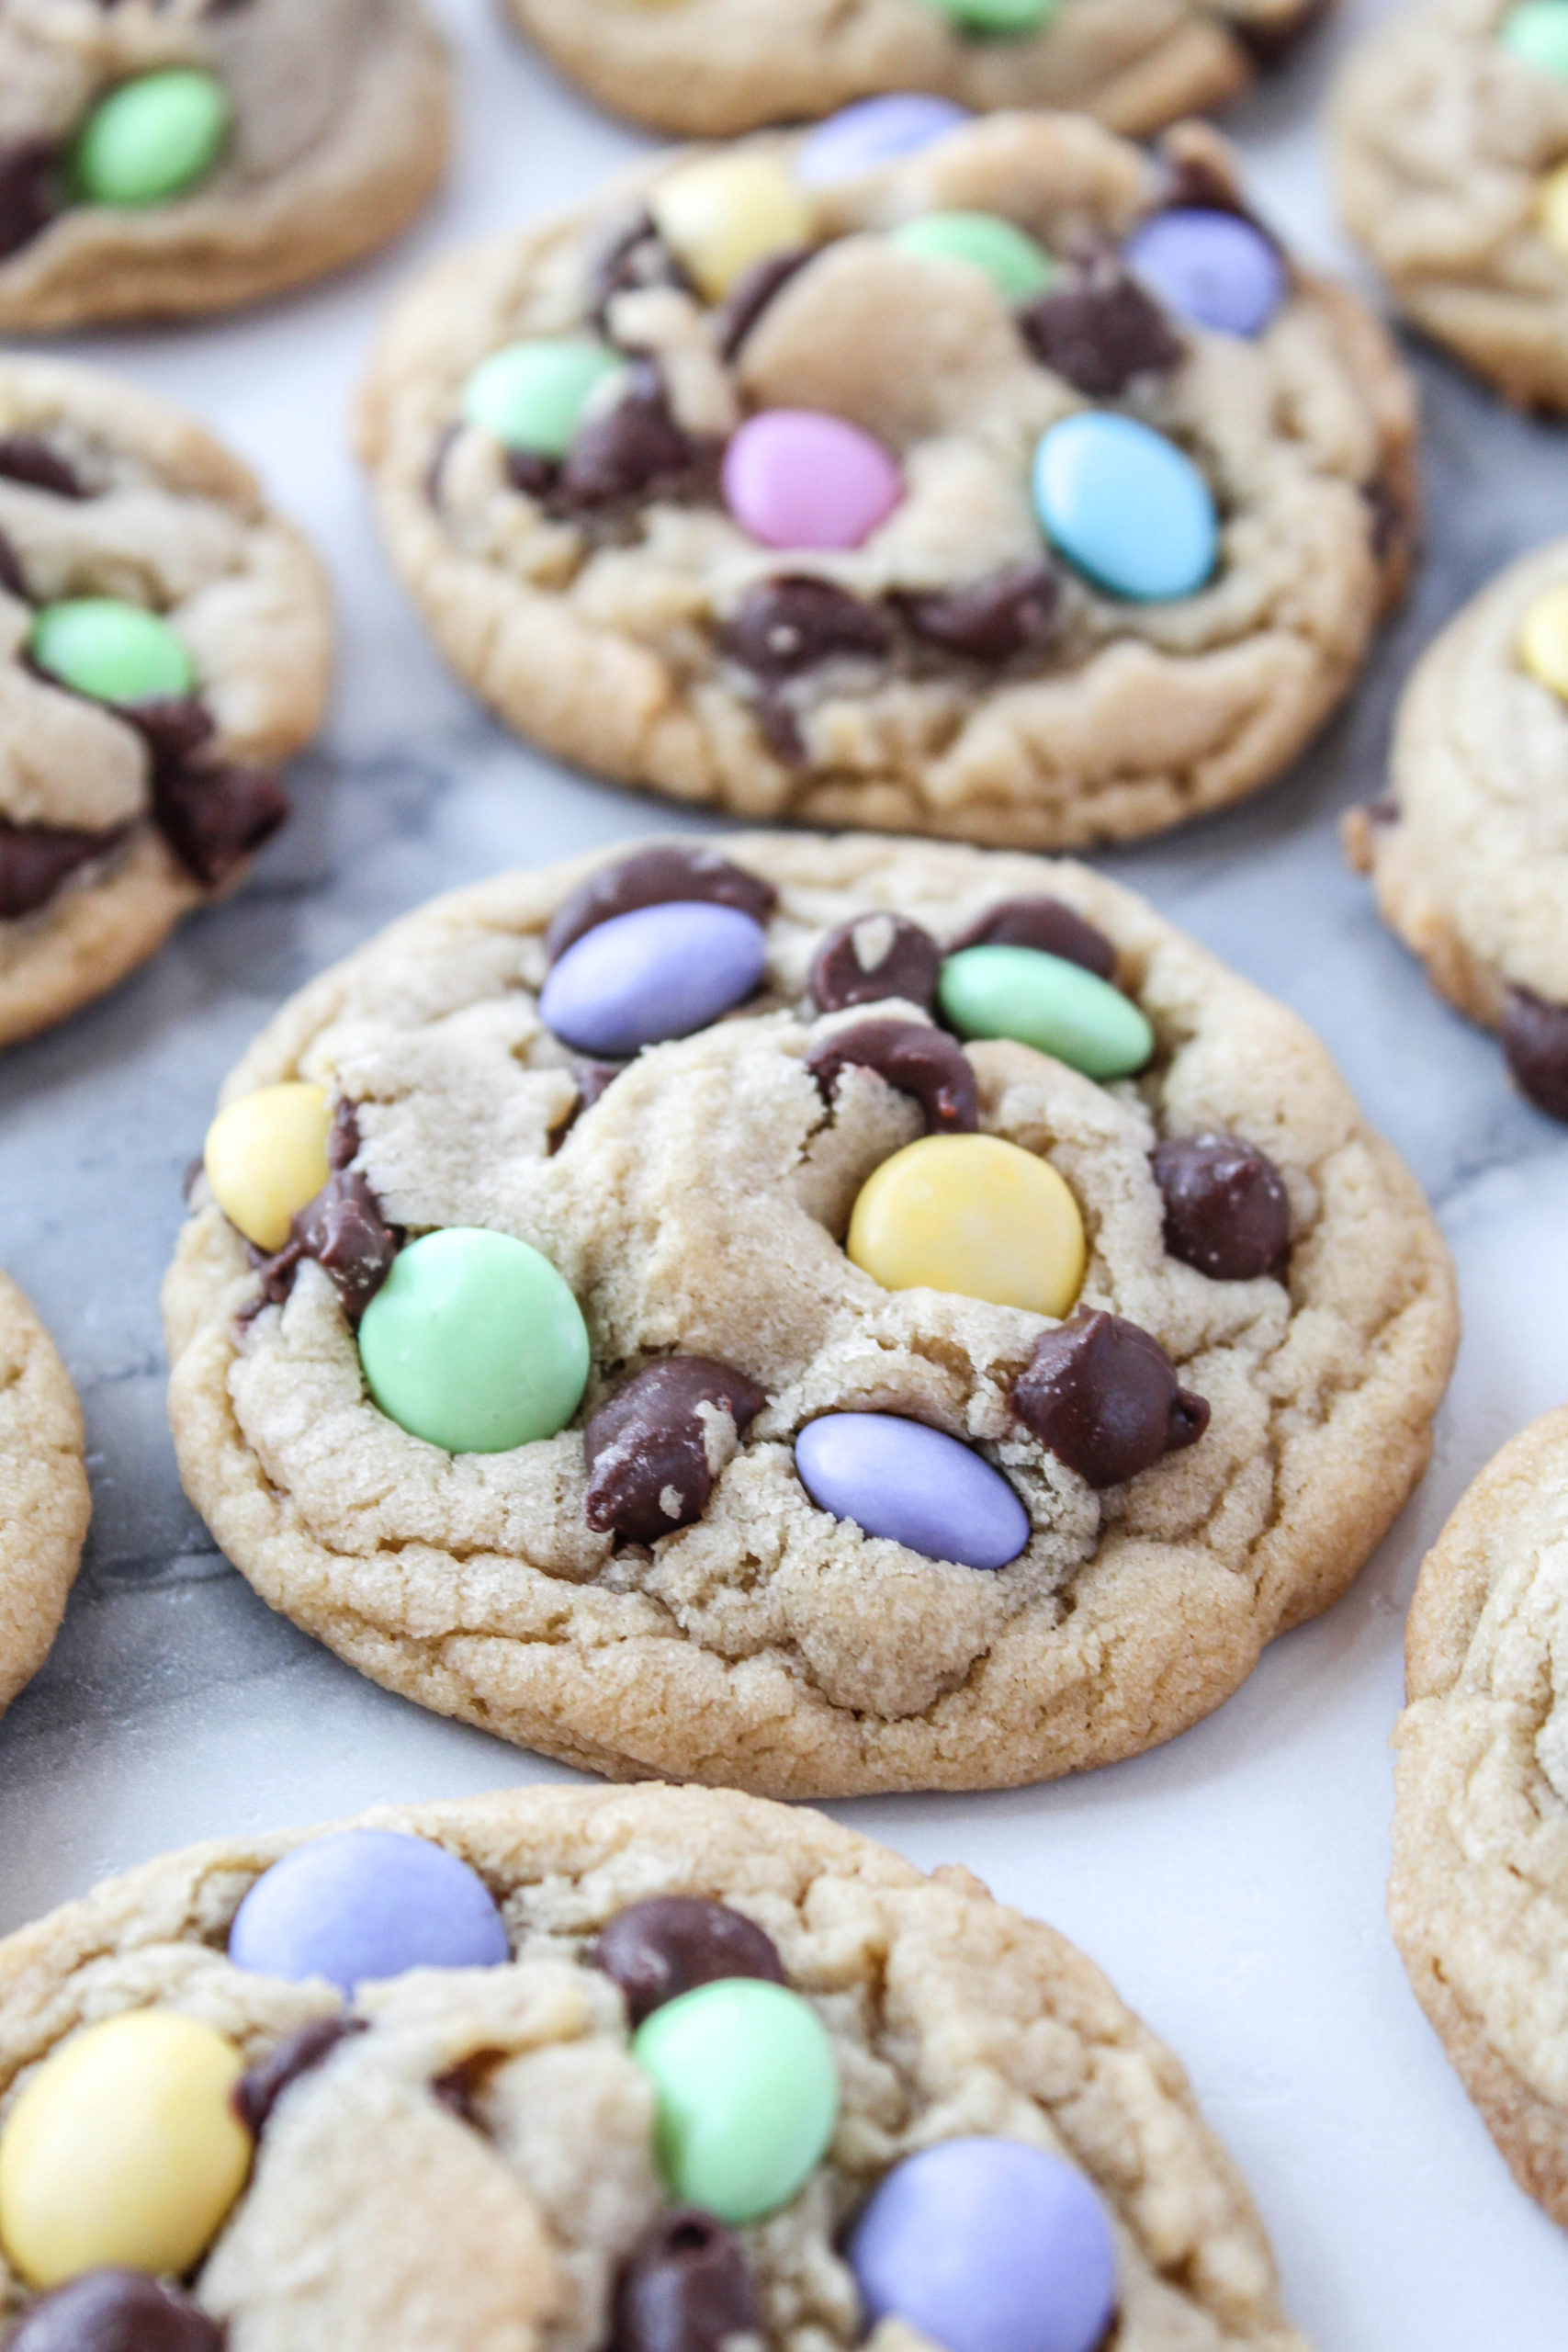 Easter Chocolate Chip Cookies